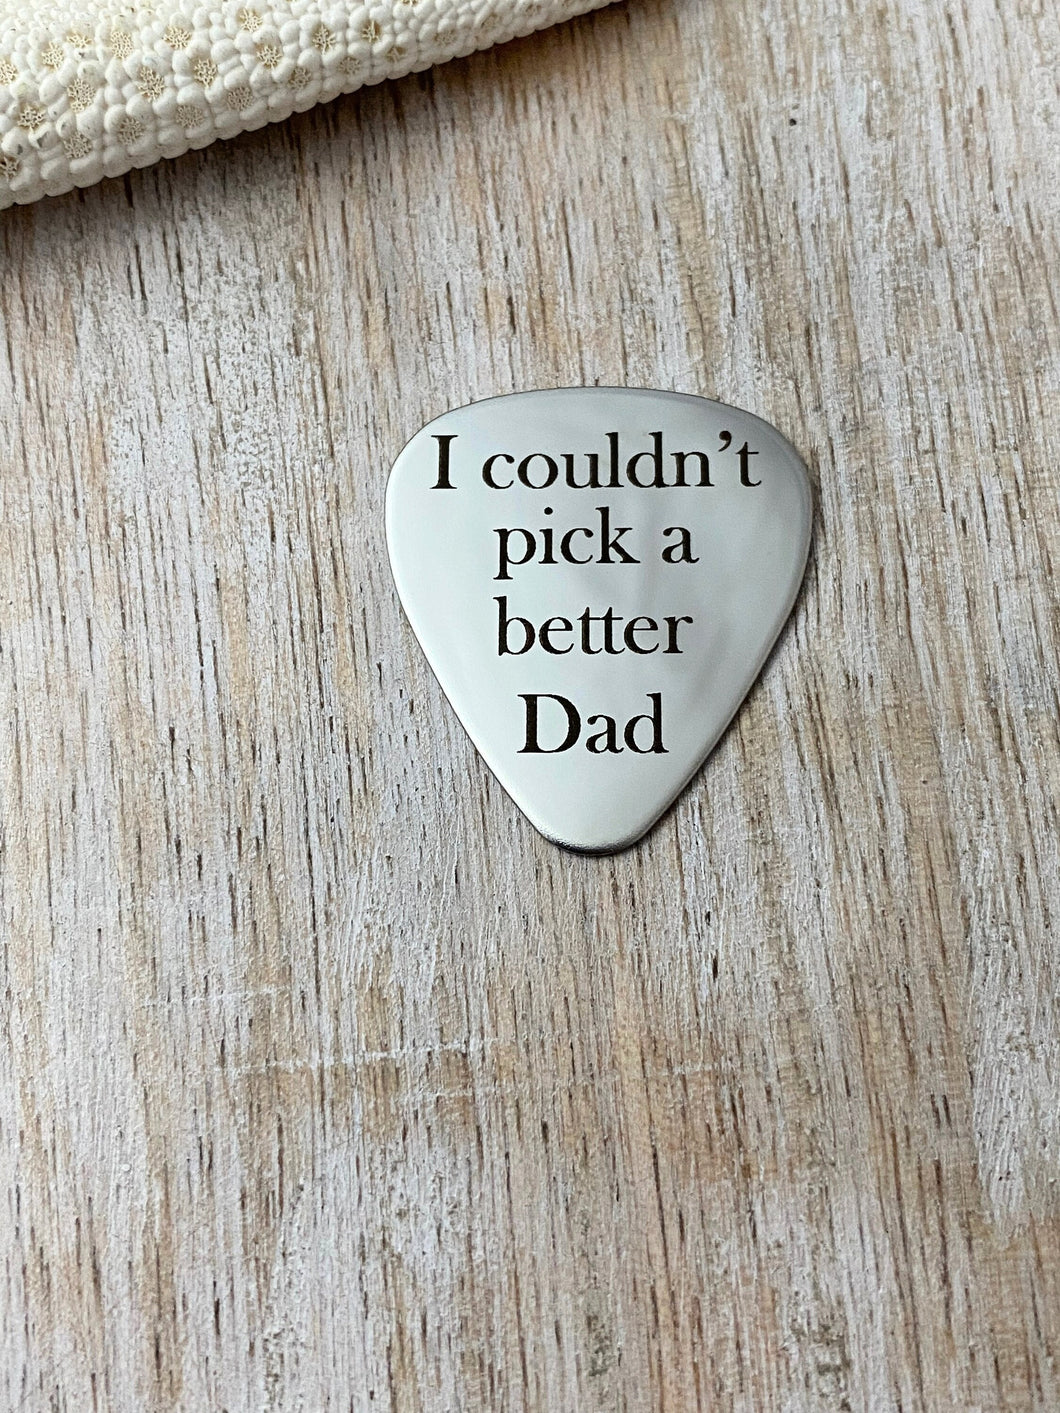 I couldn't pick a better dad guitar pick - Stainless steel - gift for him Custom - Valentine's gift for dad, Silver pick, gift for husband